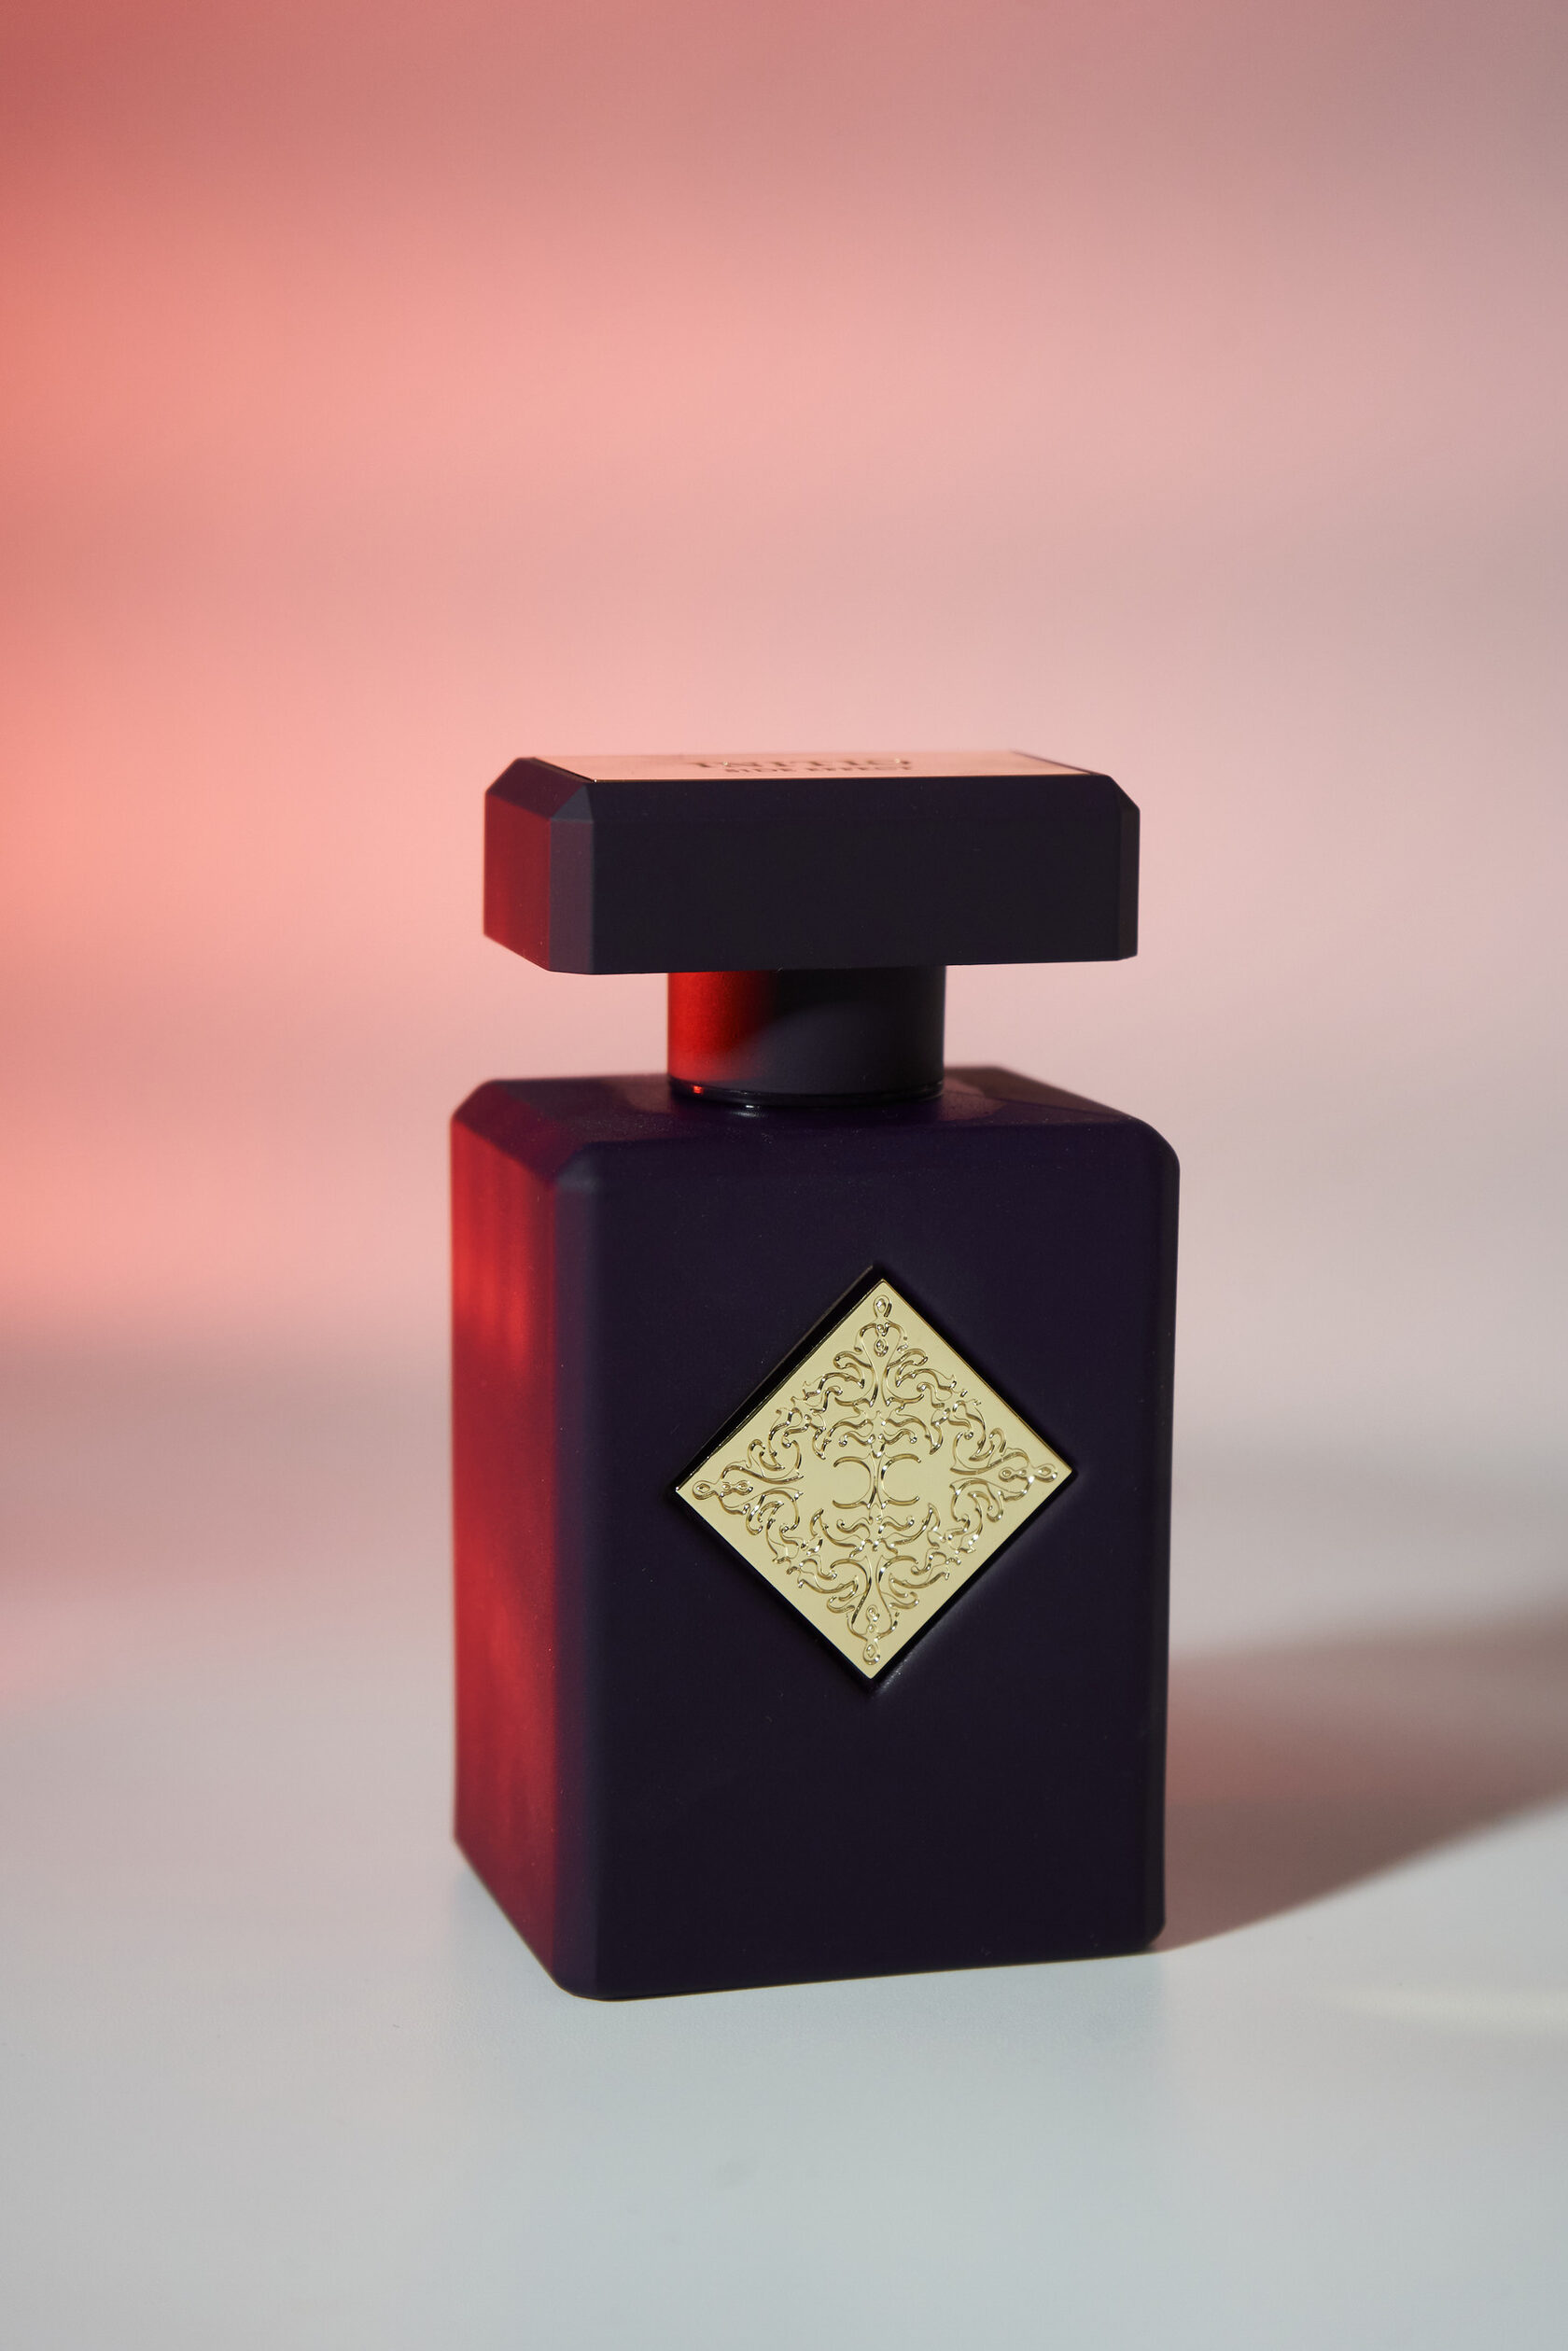 Initio prives psychedelic love. Psychedelic Love Initio Parfums prives. Side Effect Initio Parfums prives. Инитио Psychedelic Love пирамида. Narcotic Delight Initio Parfums prives.